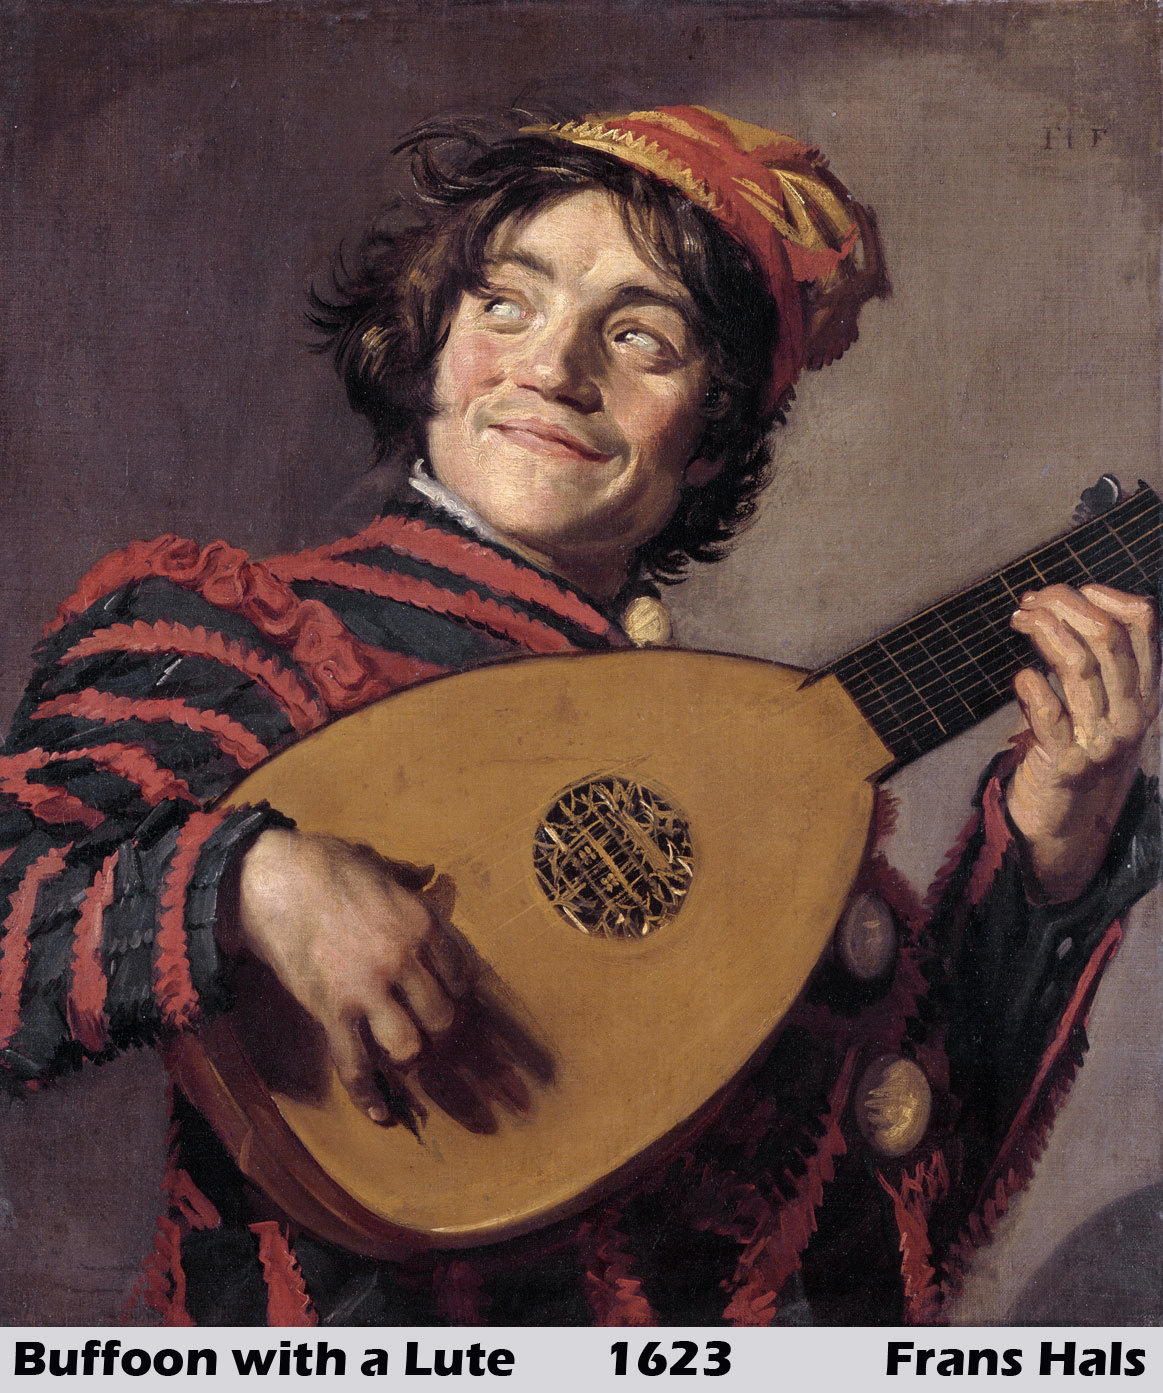 Buffoon with a Lute by Frans Hals